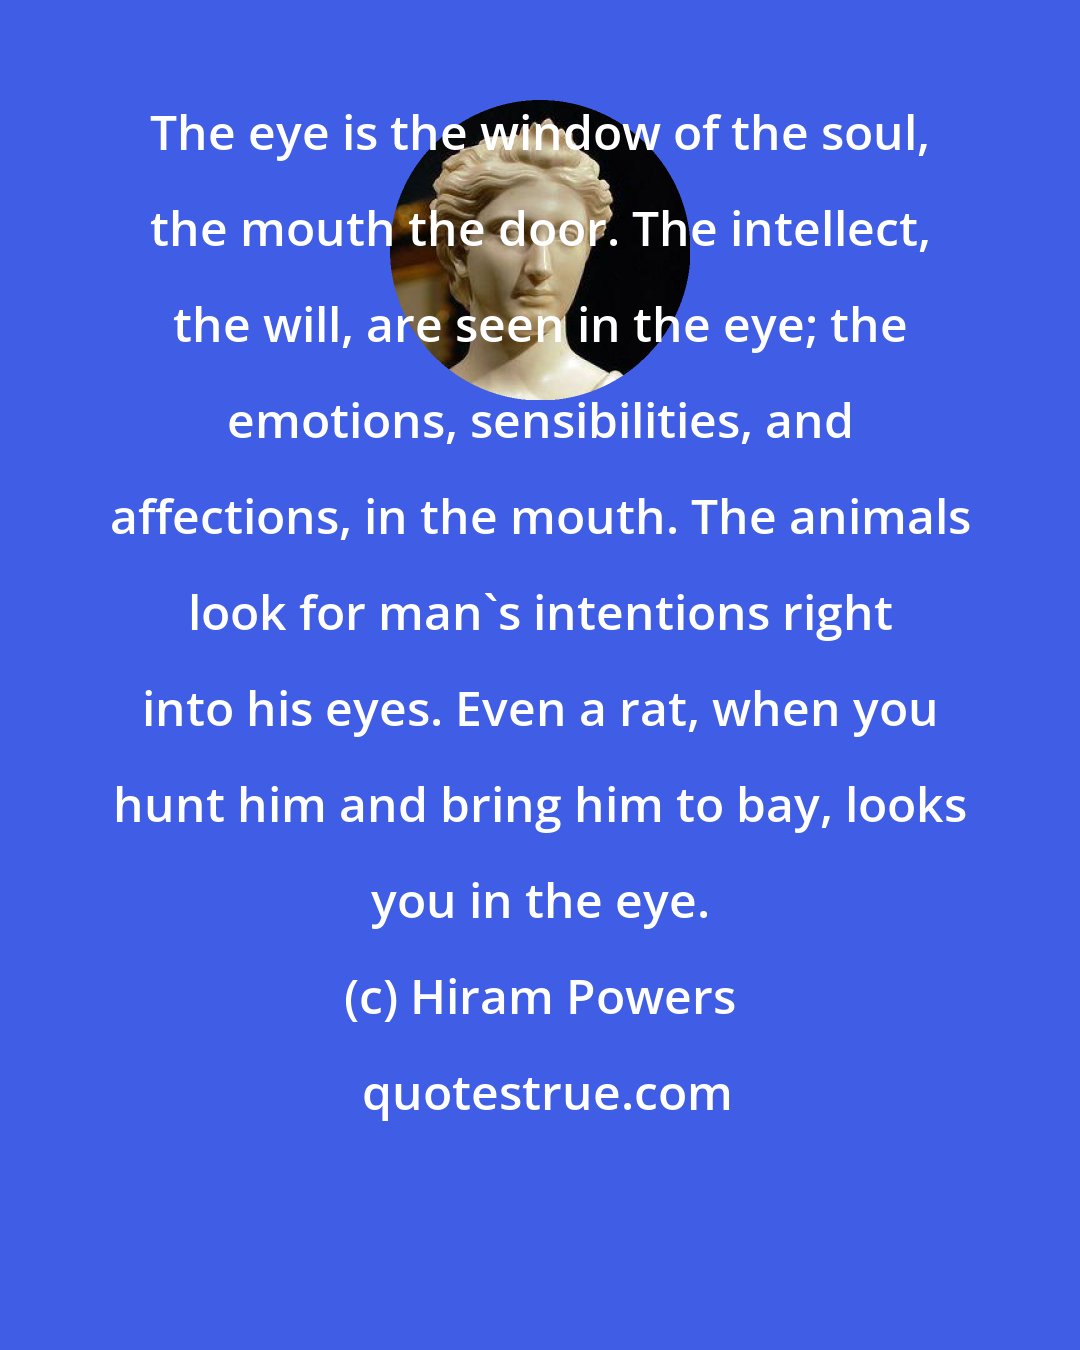 Hiram Powers: The eye is the window of the soul, the mouth the door. The intellect, the will, are seen in the eye; the emotions, sensibilities, and affections, in the mouth. The animals look for man's intentions right into his eyes. Even a rat, when you hunt him and bring him to bay, looks you in the eye.